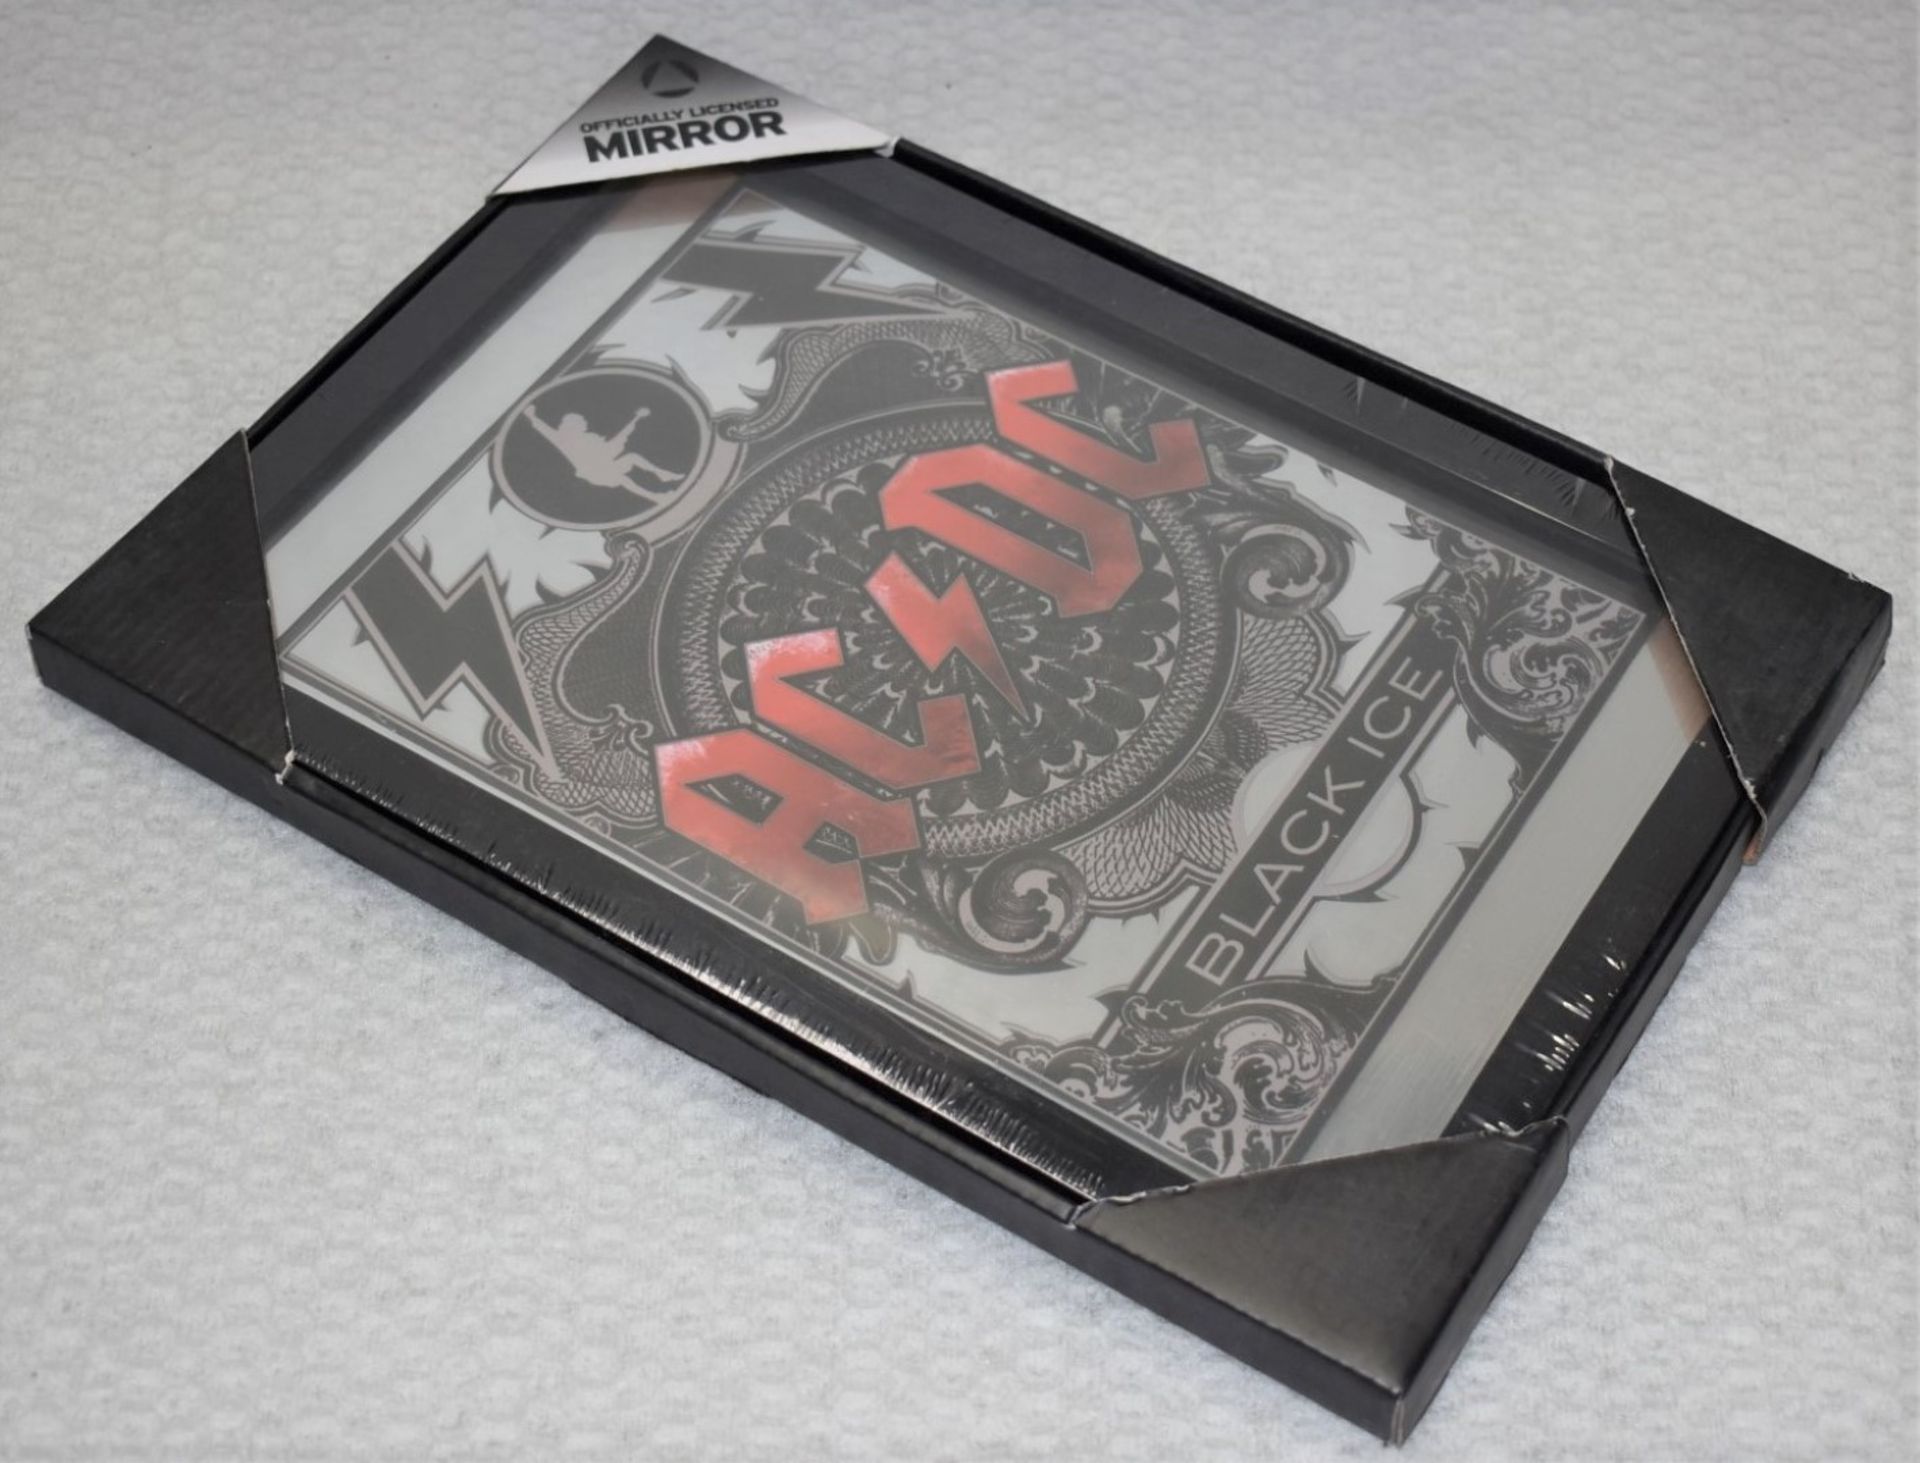 1 x ACDC Black Ice Wall Mirror - Officially Licensed Merchandise - Size: 32 x 22 cms -New &